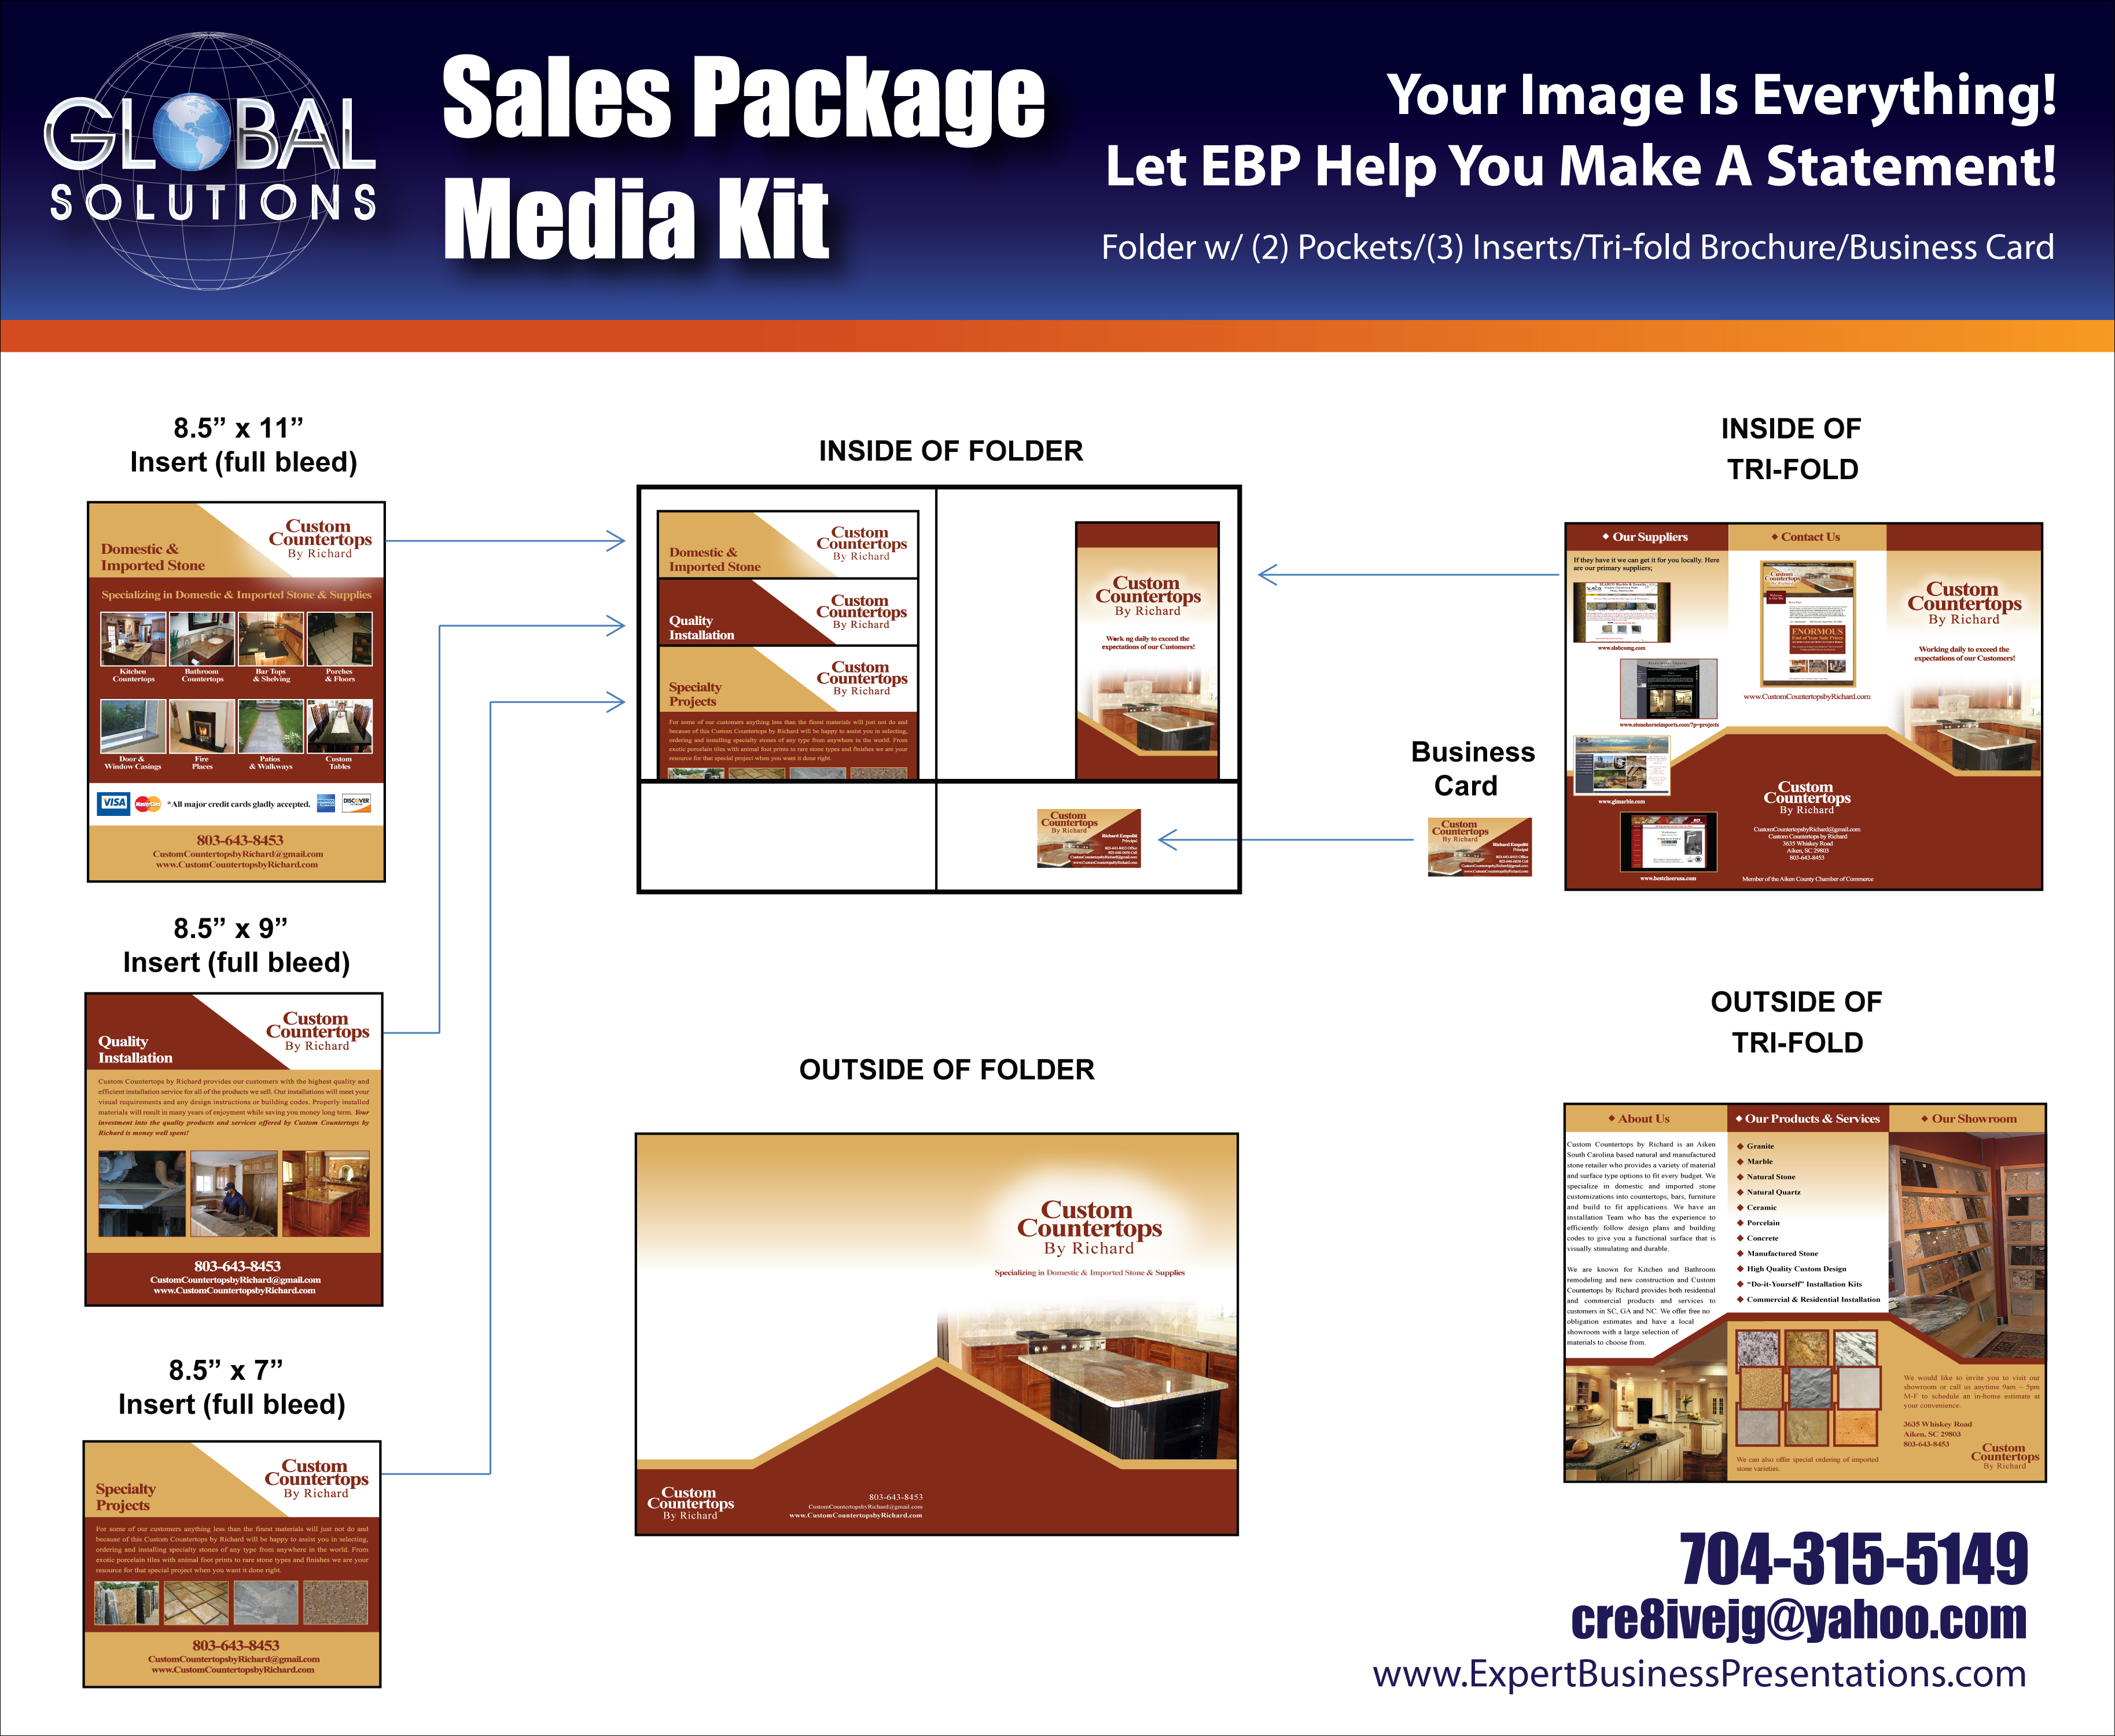 Global package. Global sales solutions. Supermarket promotion materials. Global solutions.